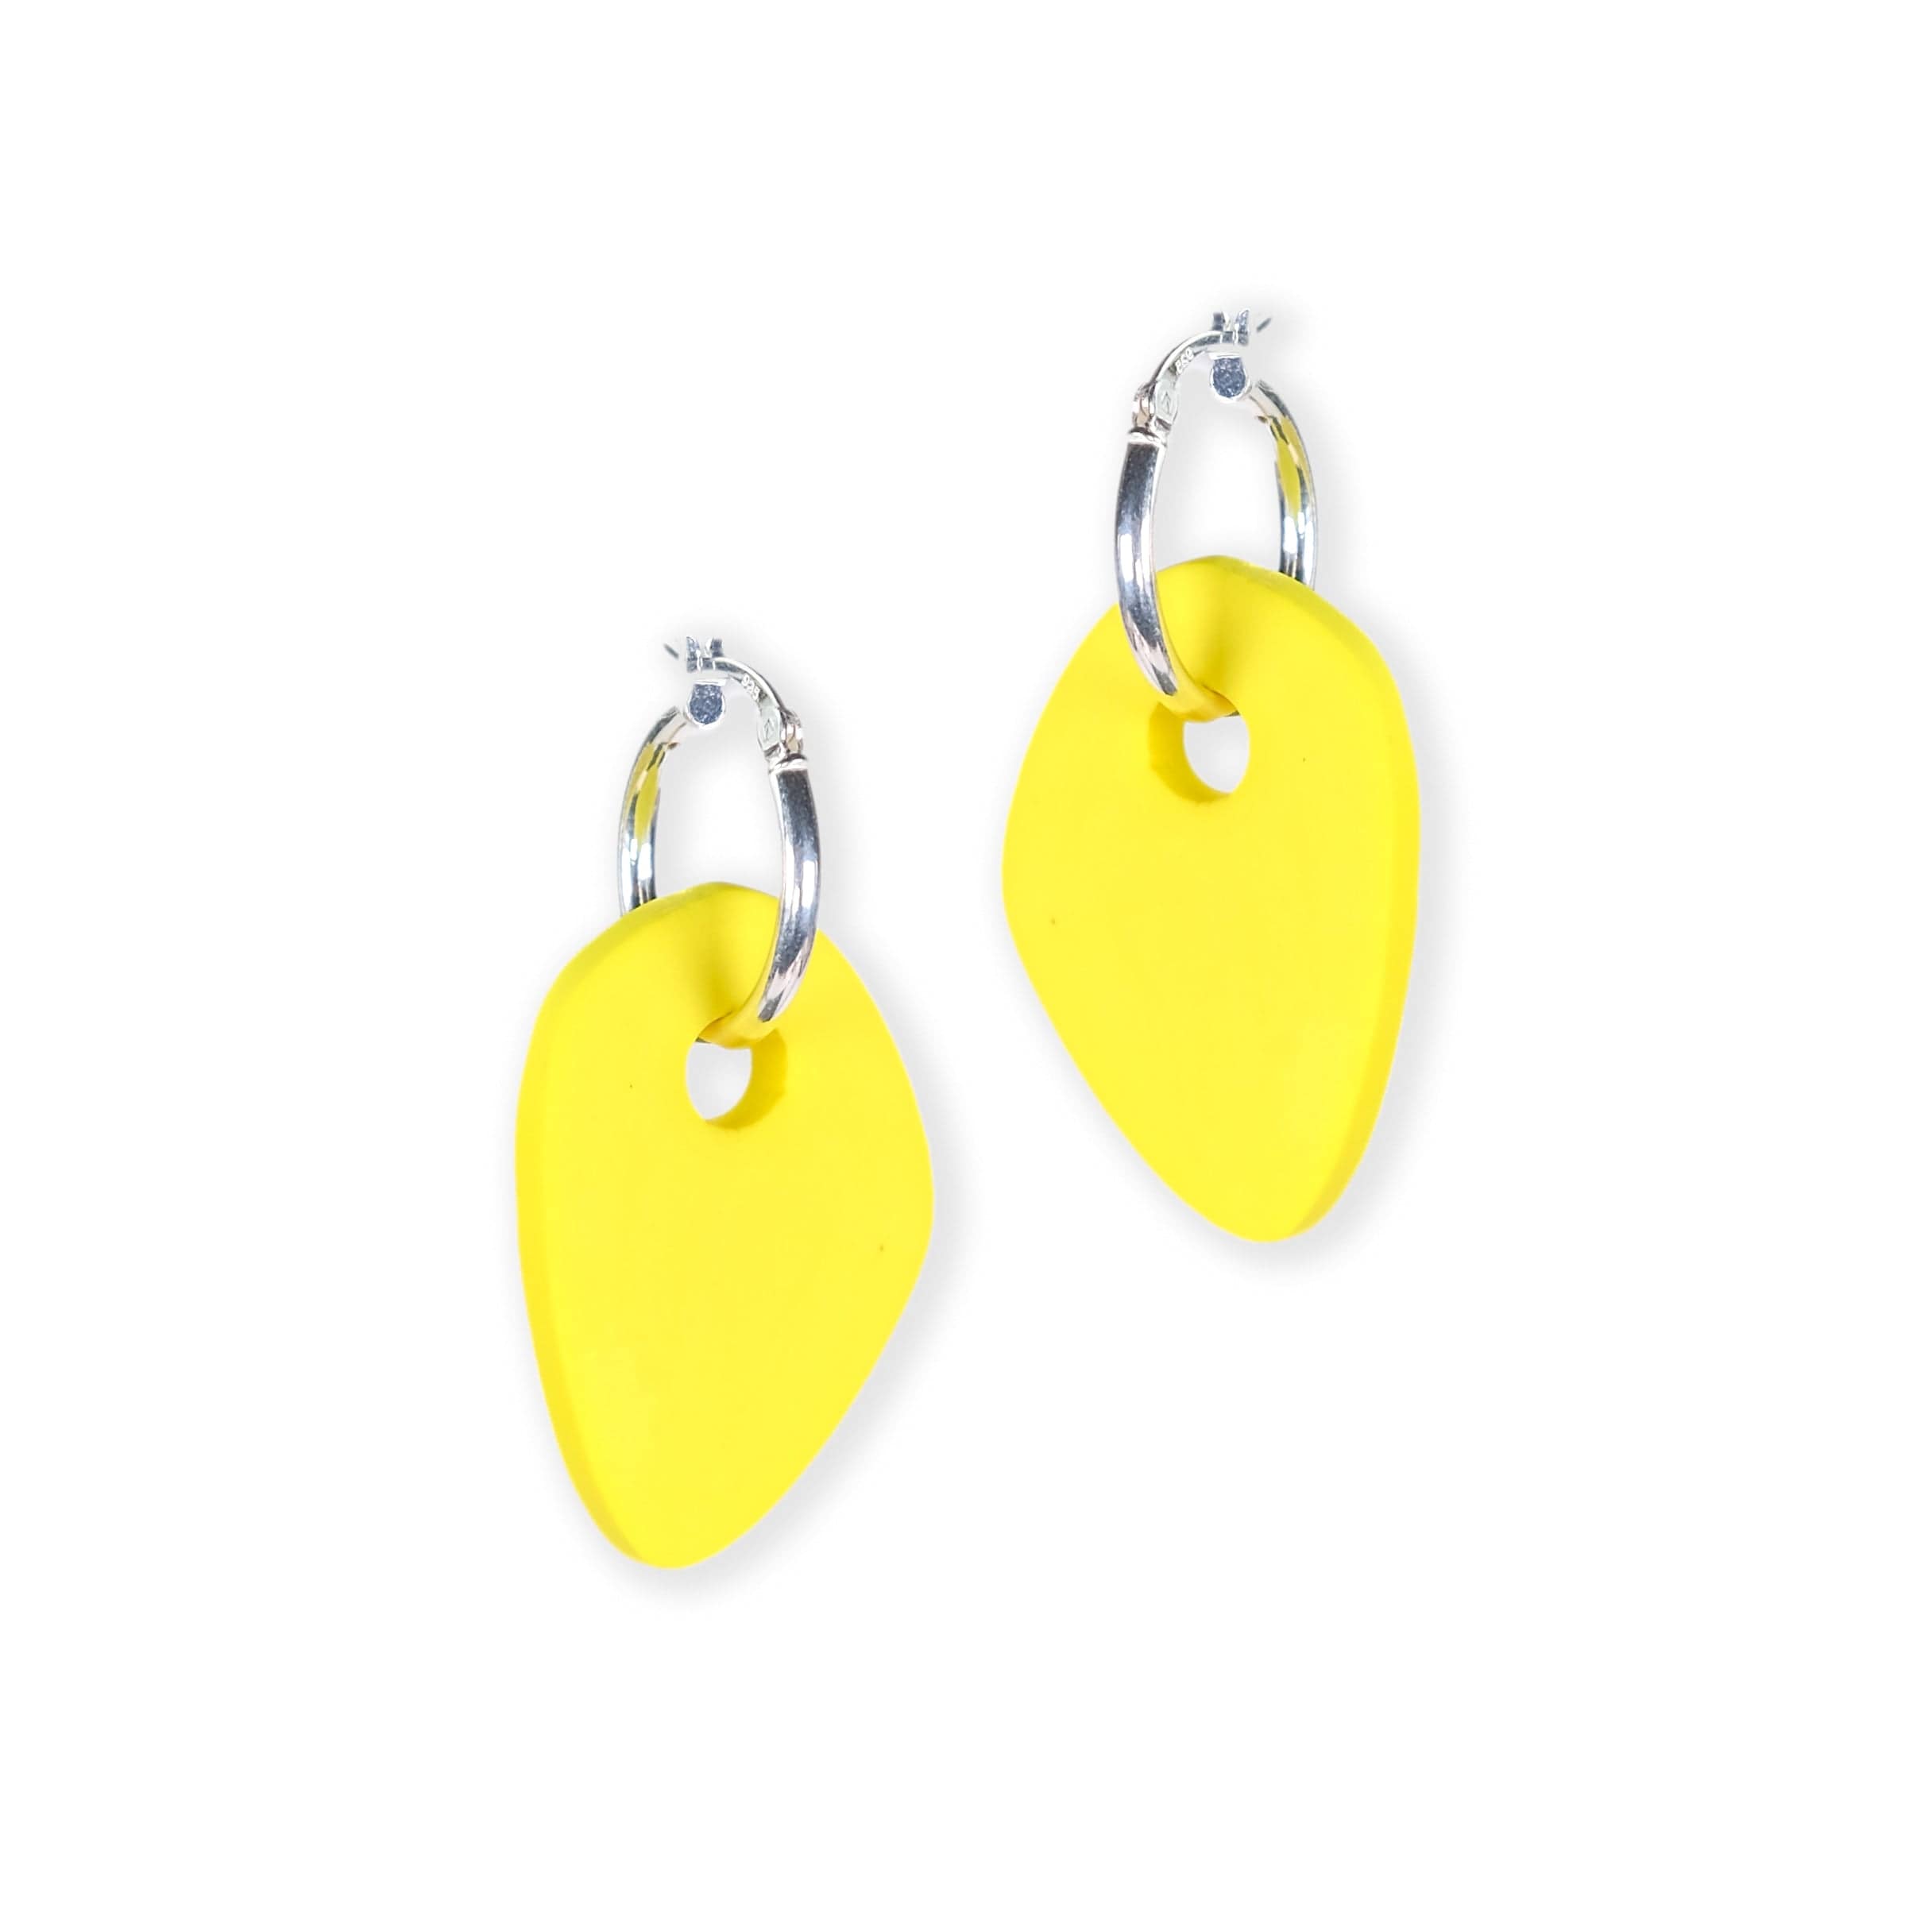 Organic shapes, hoop charm dangly earrings Calder inspired in yellow #color_yellow